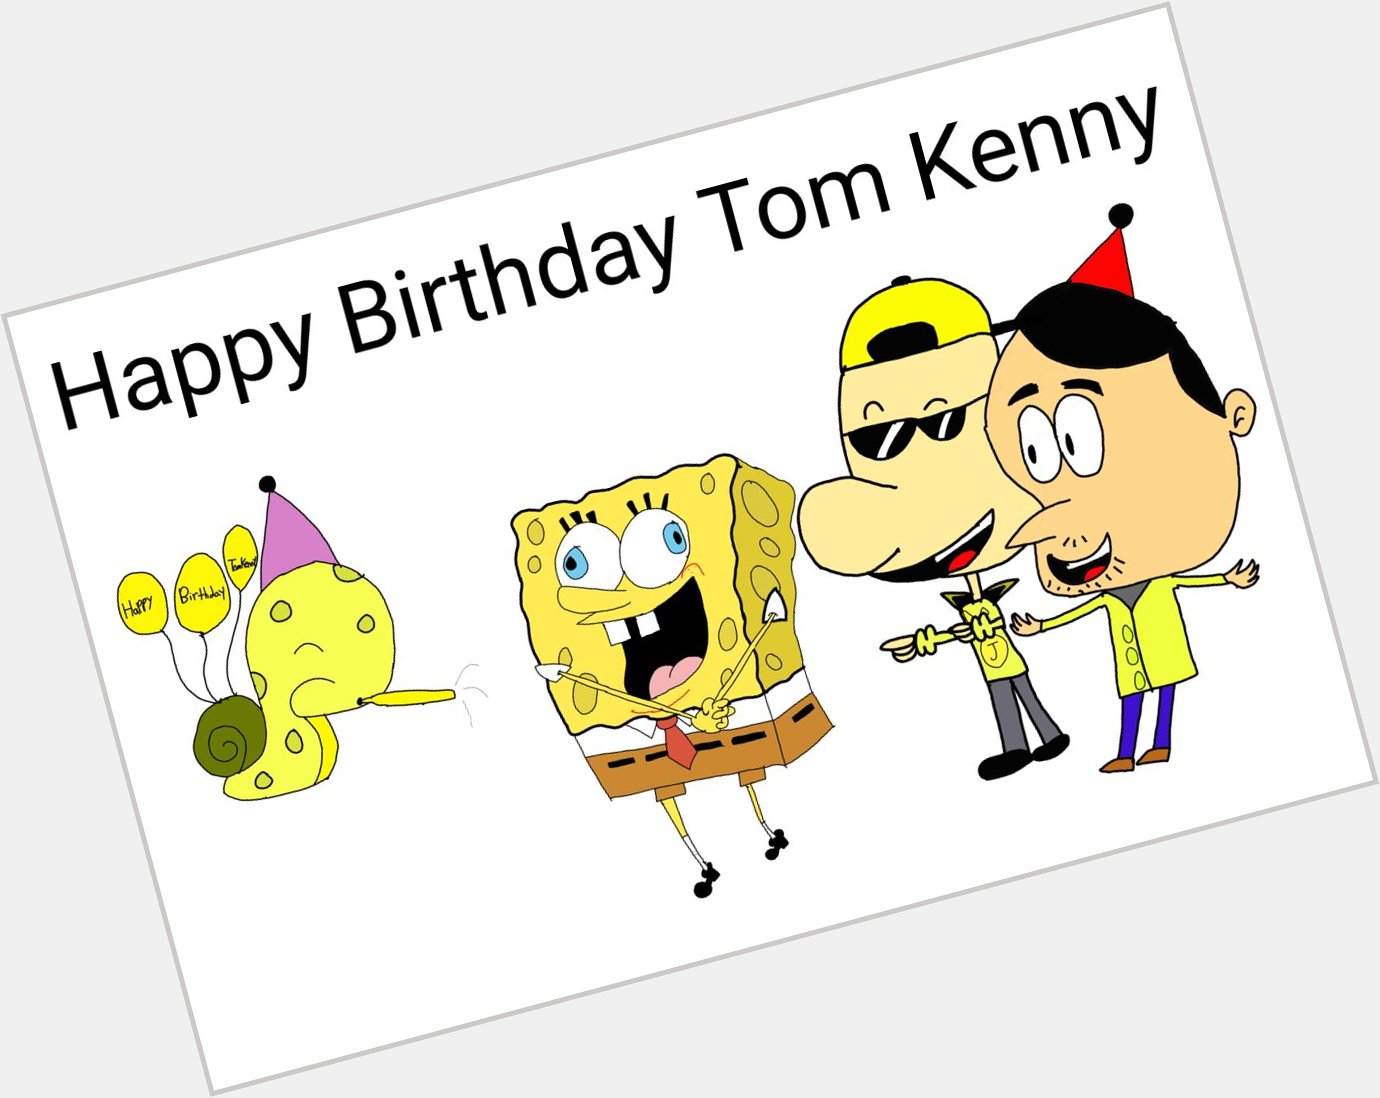  Happy Birthday Tom Kenny to you, Check it out. 